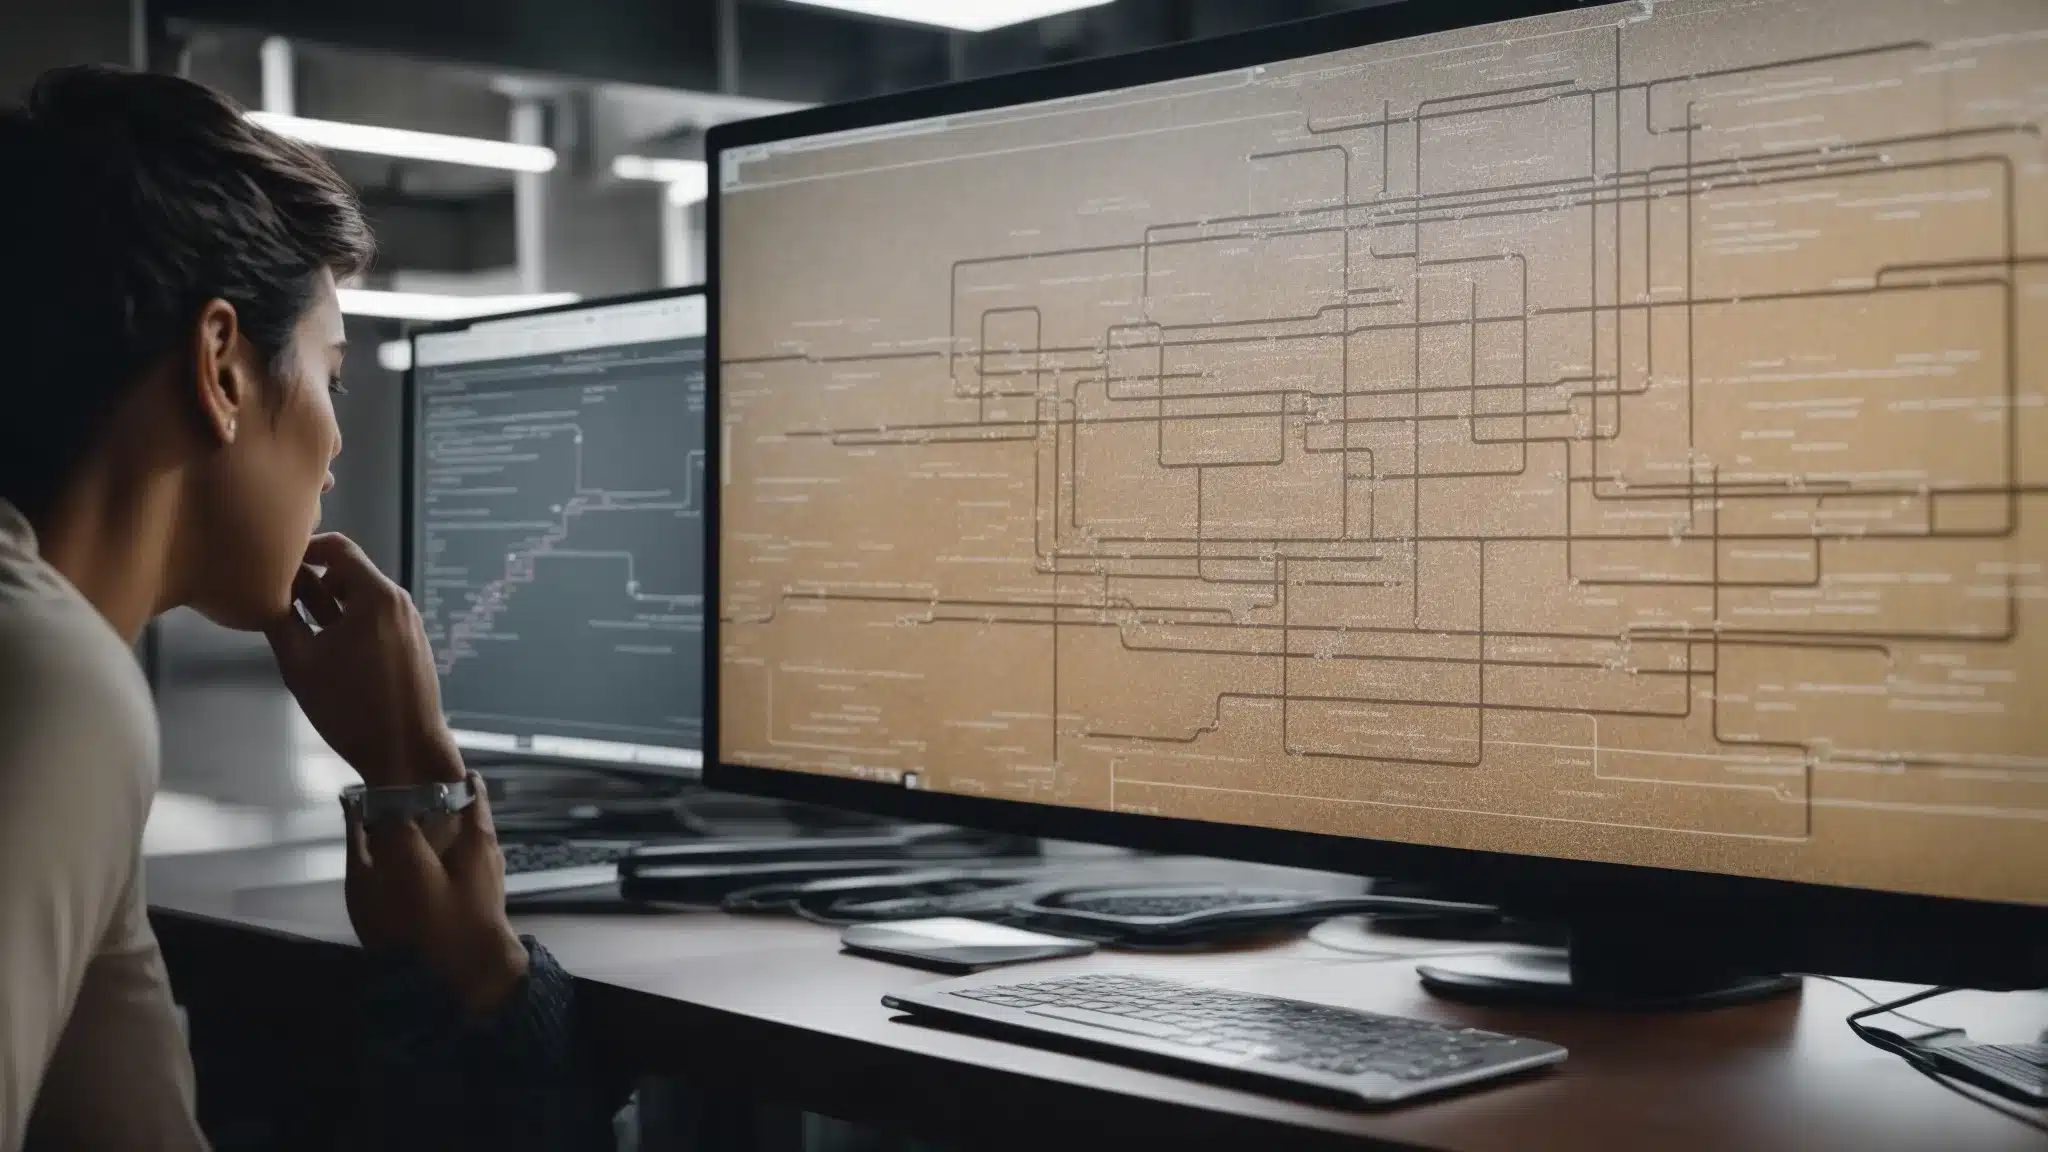 a person examines a complex flowchart on a computer screen, indicating a network of web pages and redirection pathways.